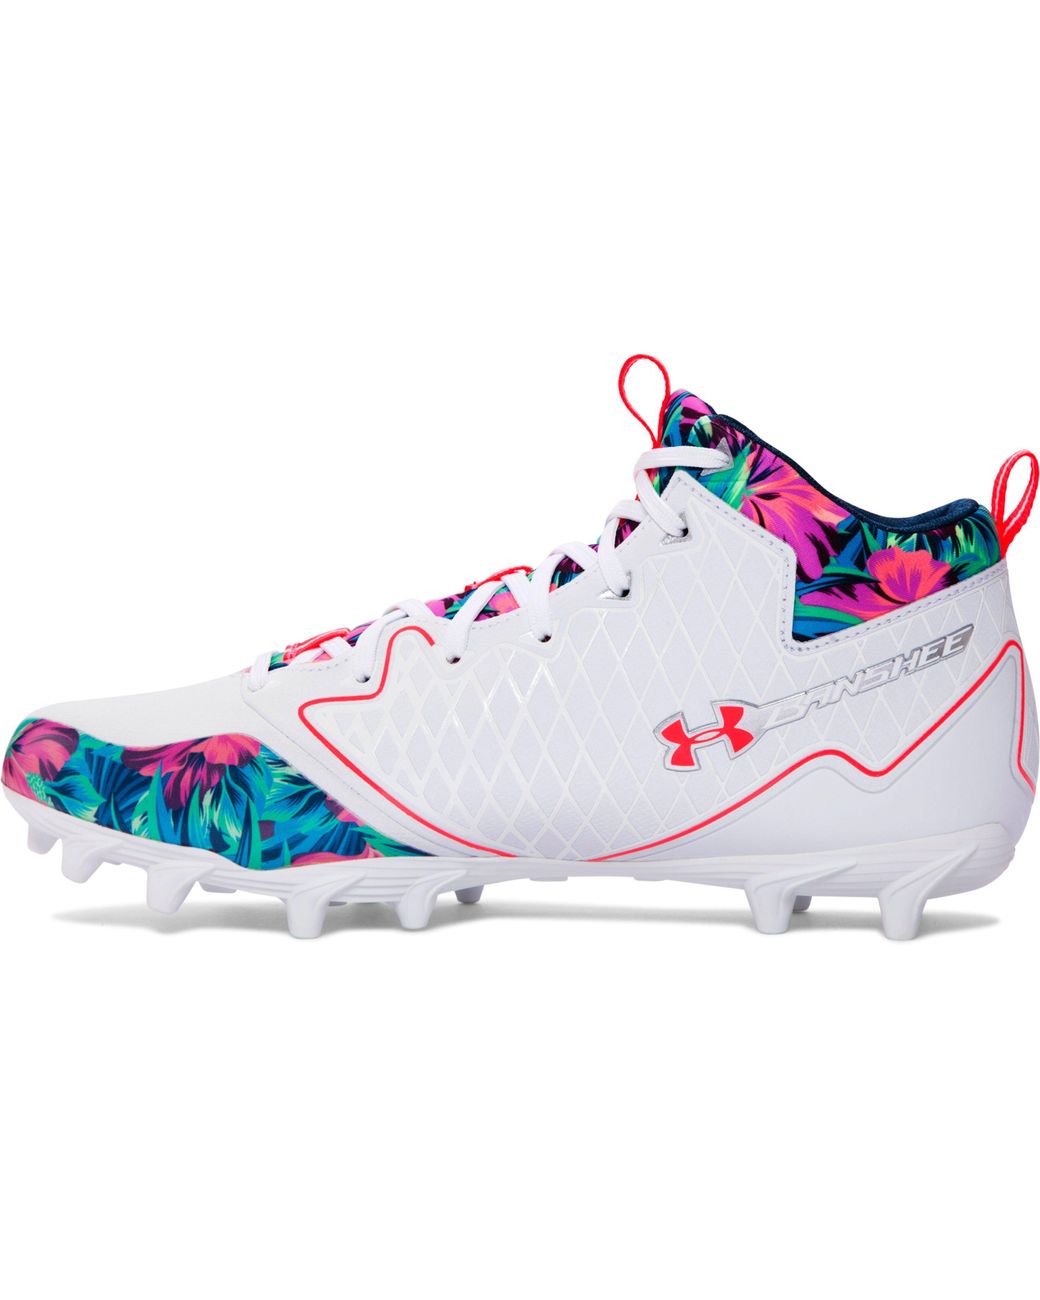 Under Armour Banshee NEW Mens 1297352-101 White Football/Lacrosse Cleats Size 11 